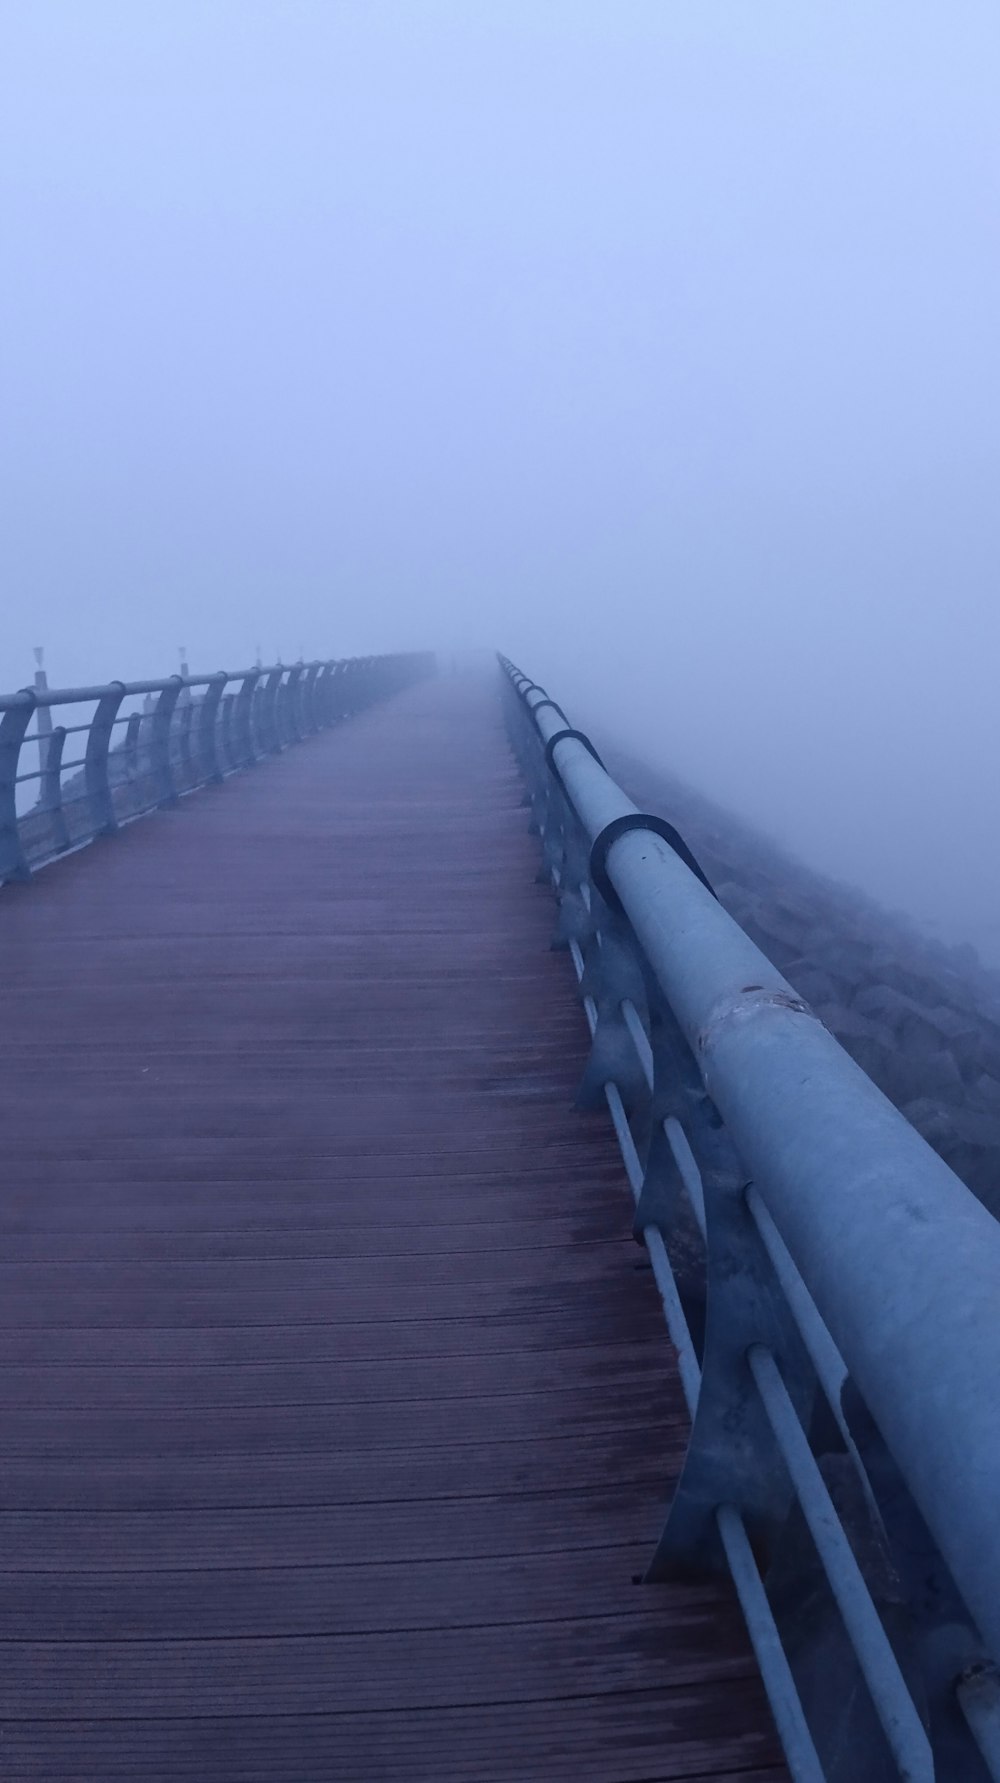 a wooden bridge in the middle of a foggy day